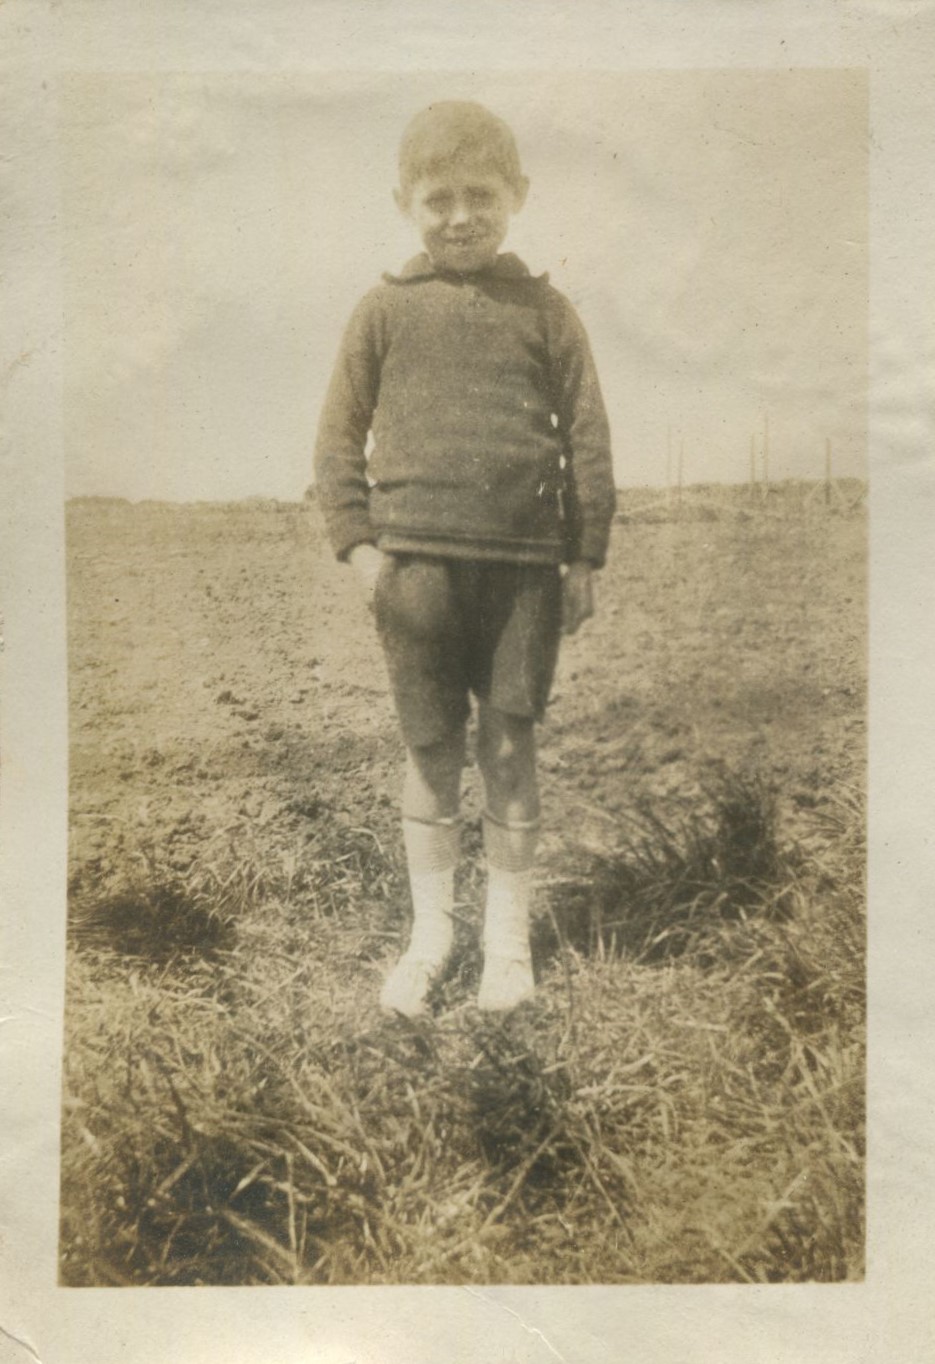 Young boy standing on grass at the edge of a field